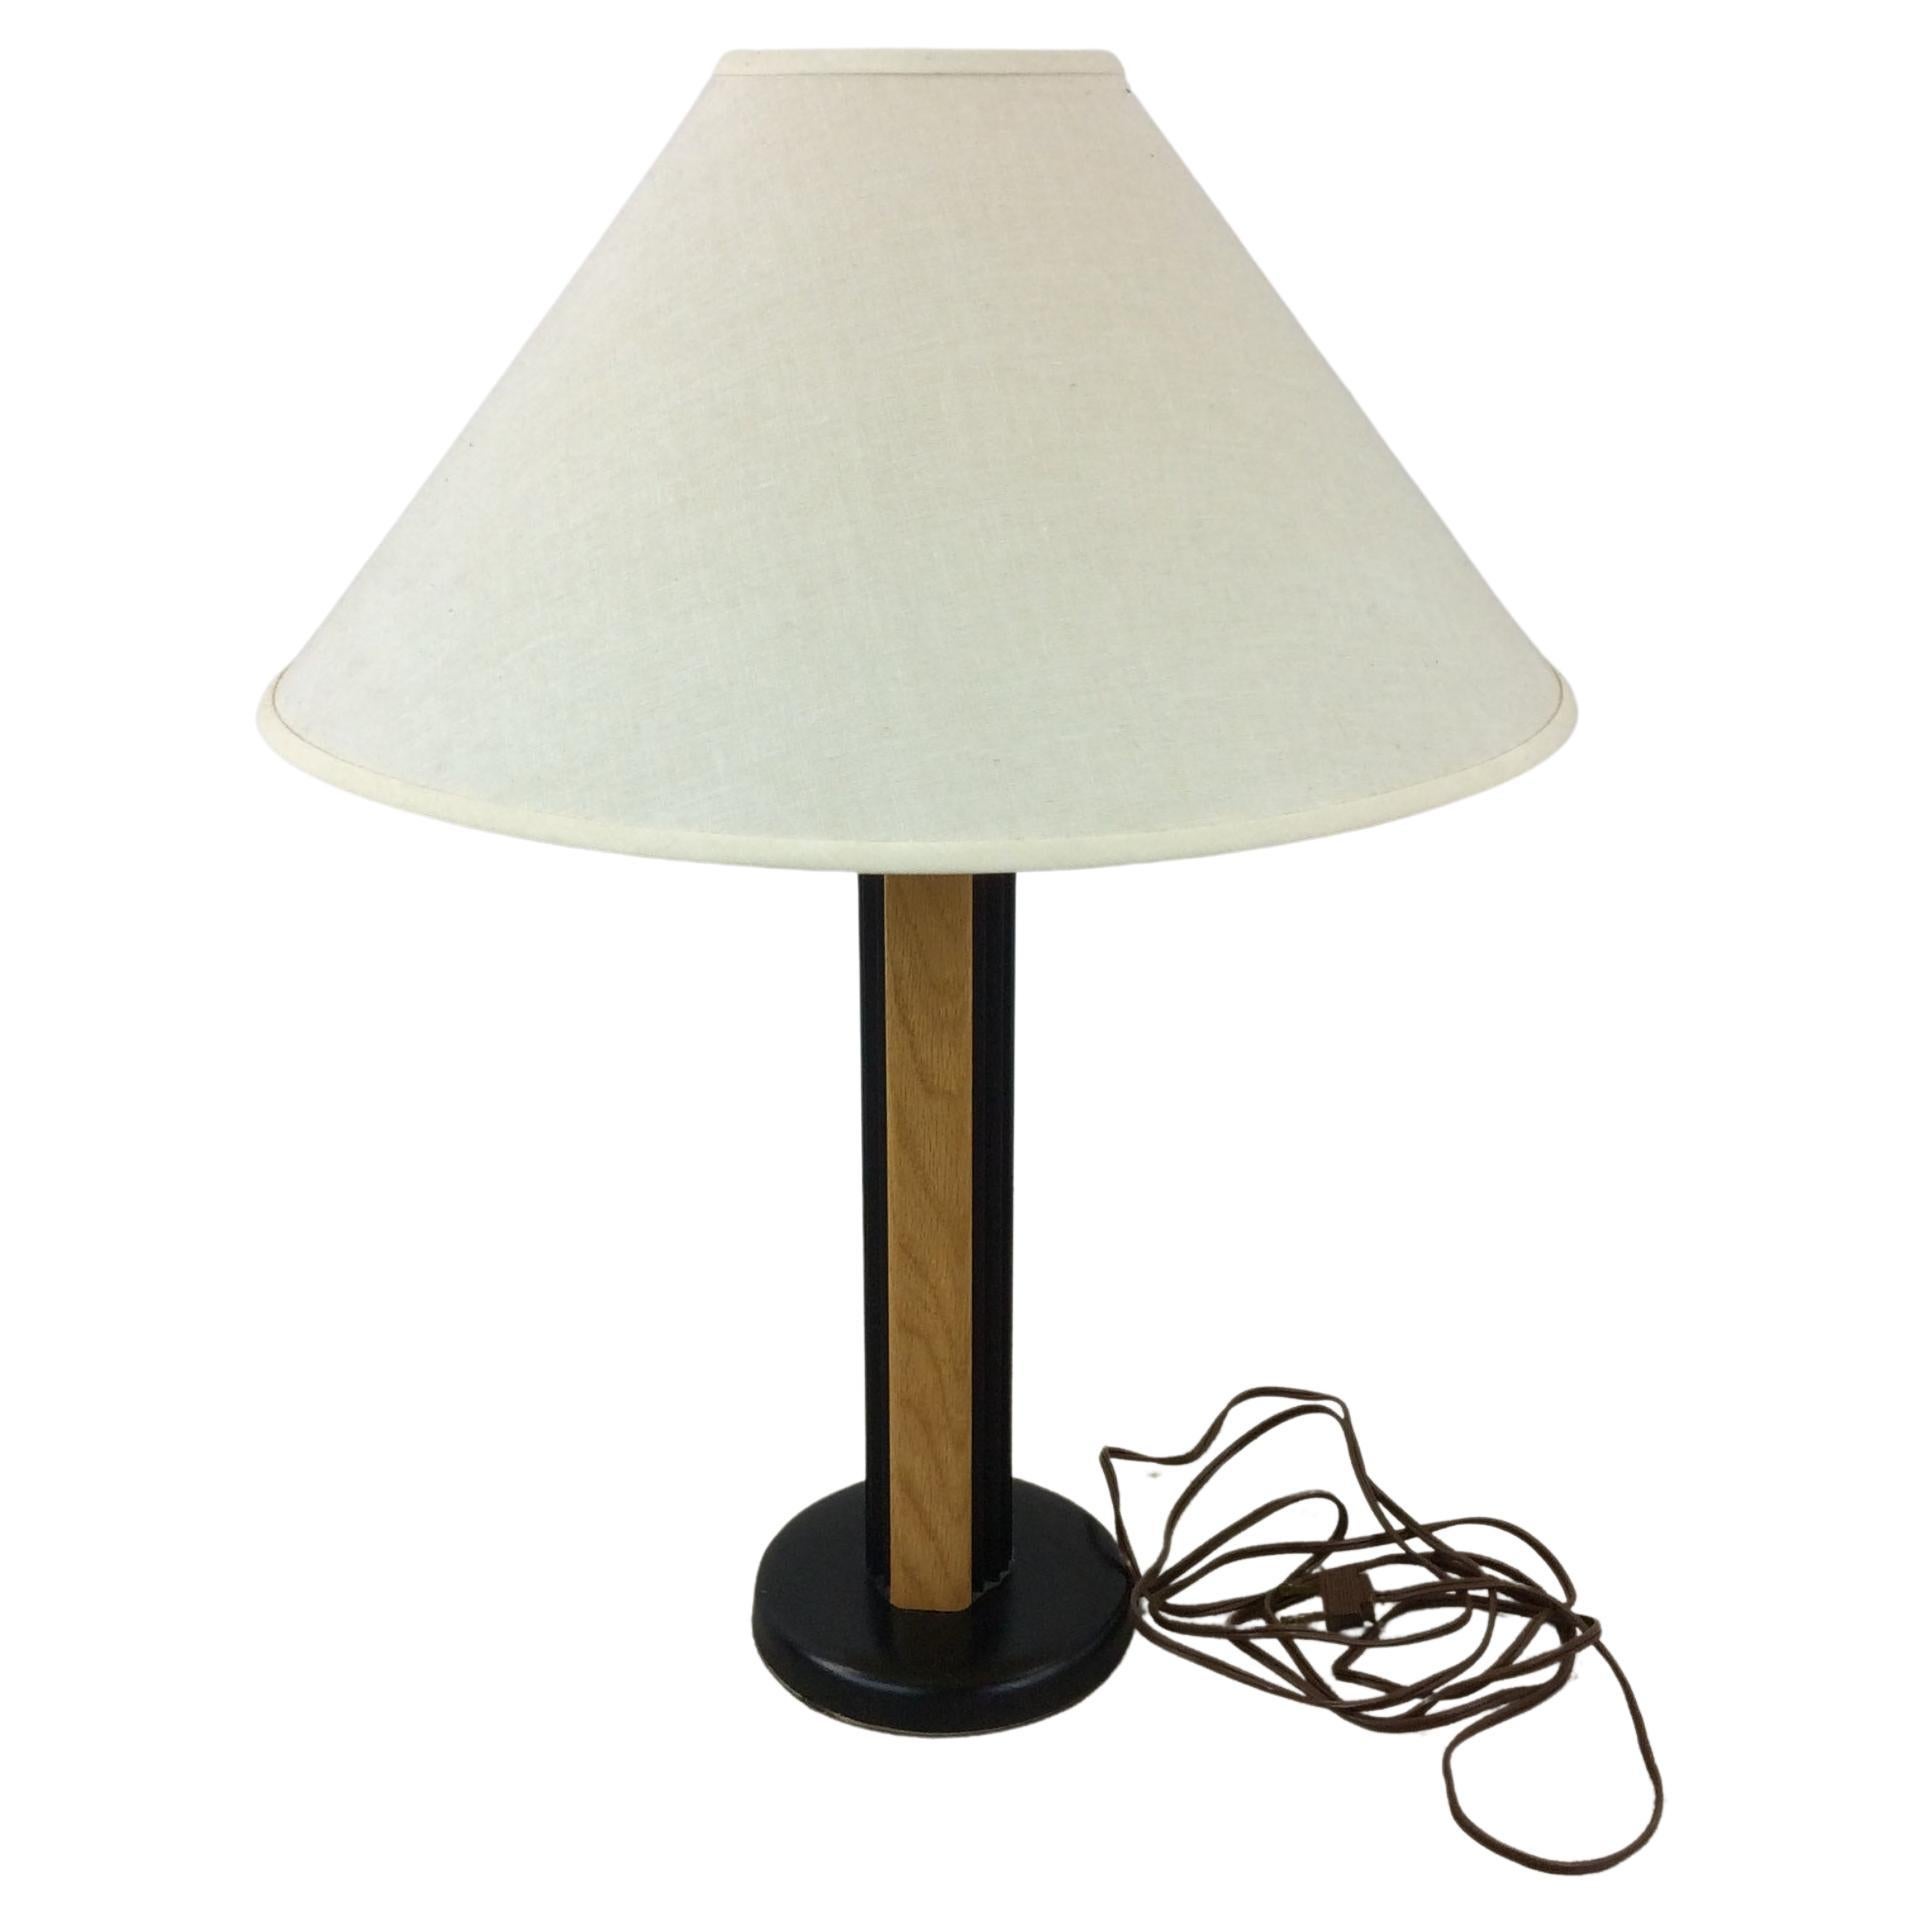 Vintage Postmodern Table Lamp Black with Teak Wood Accent & Empire Shade